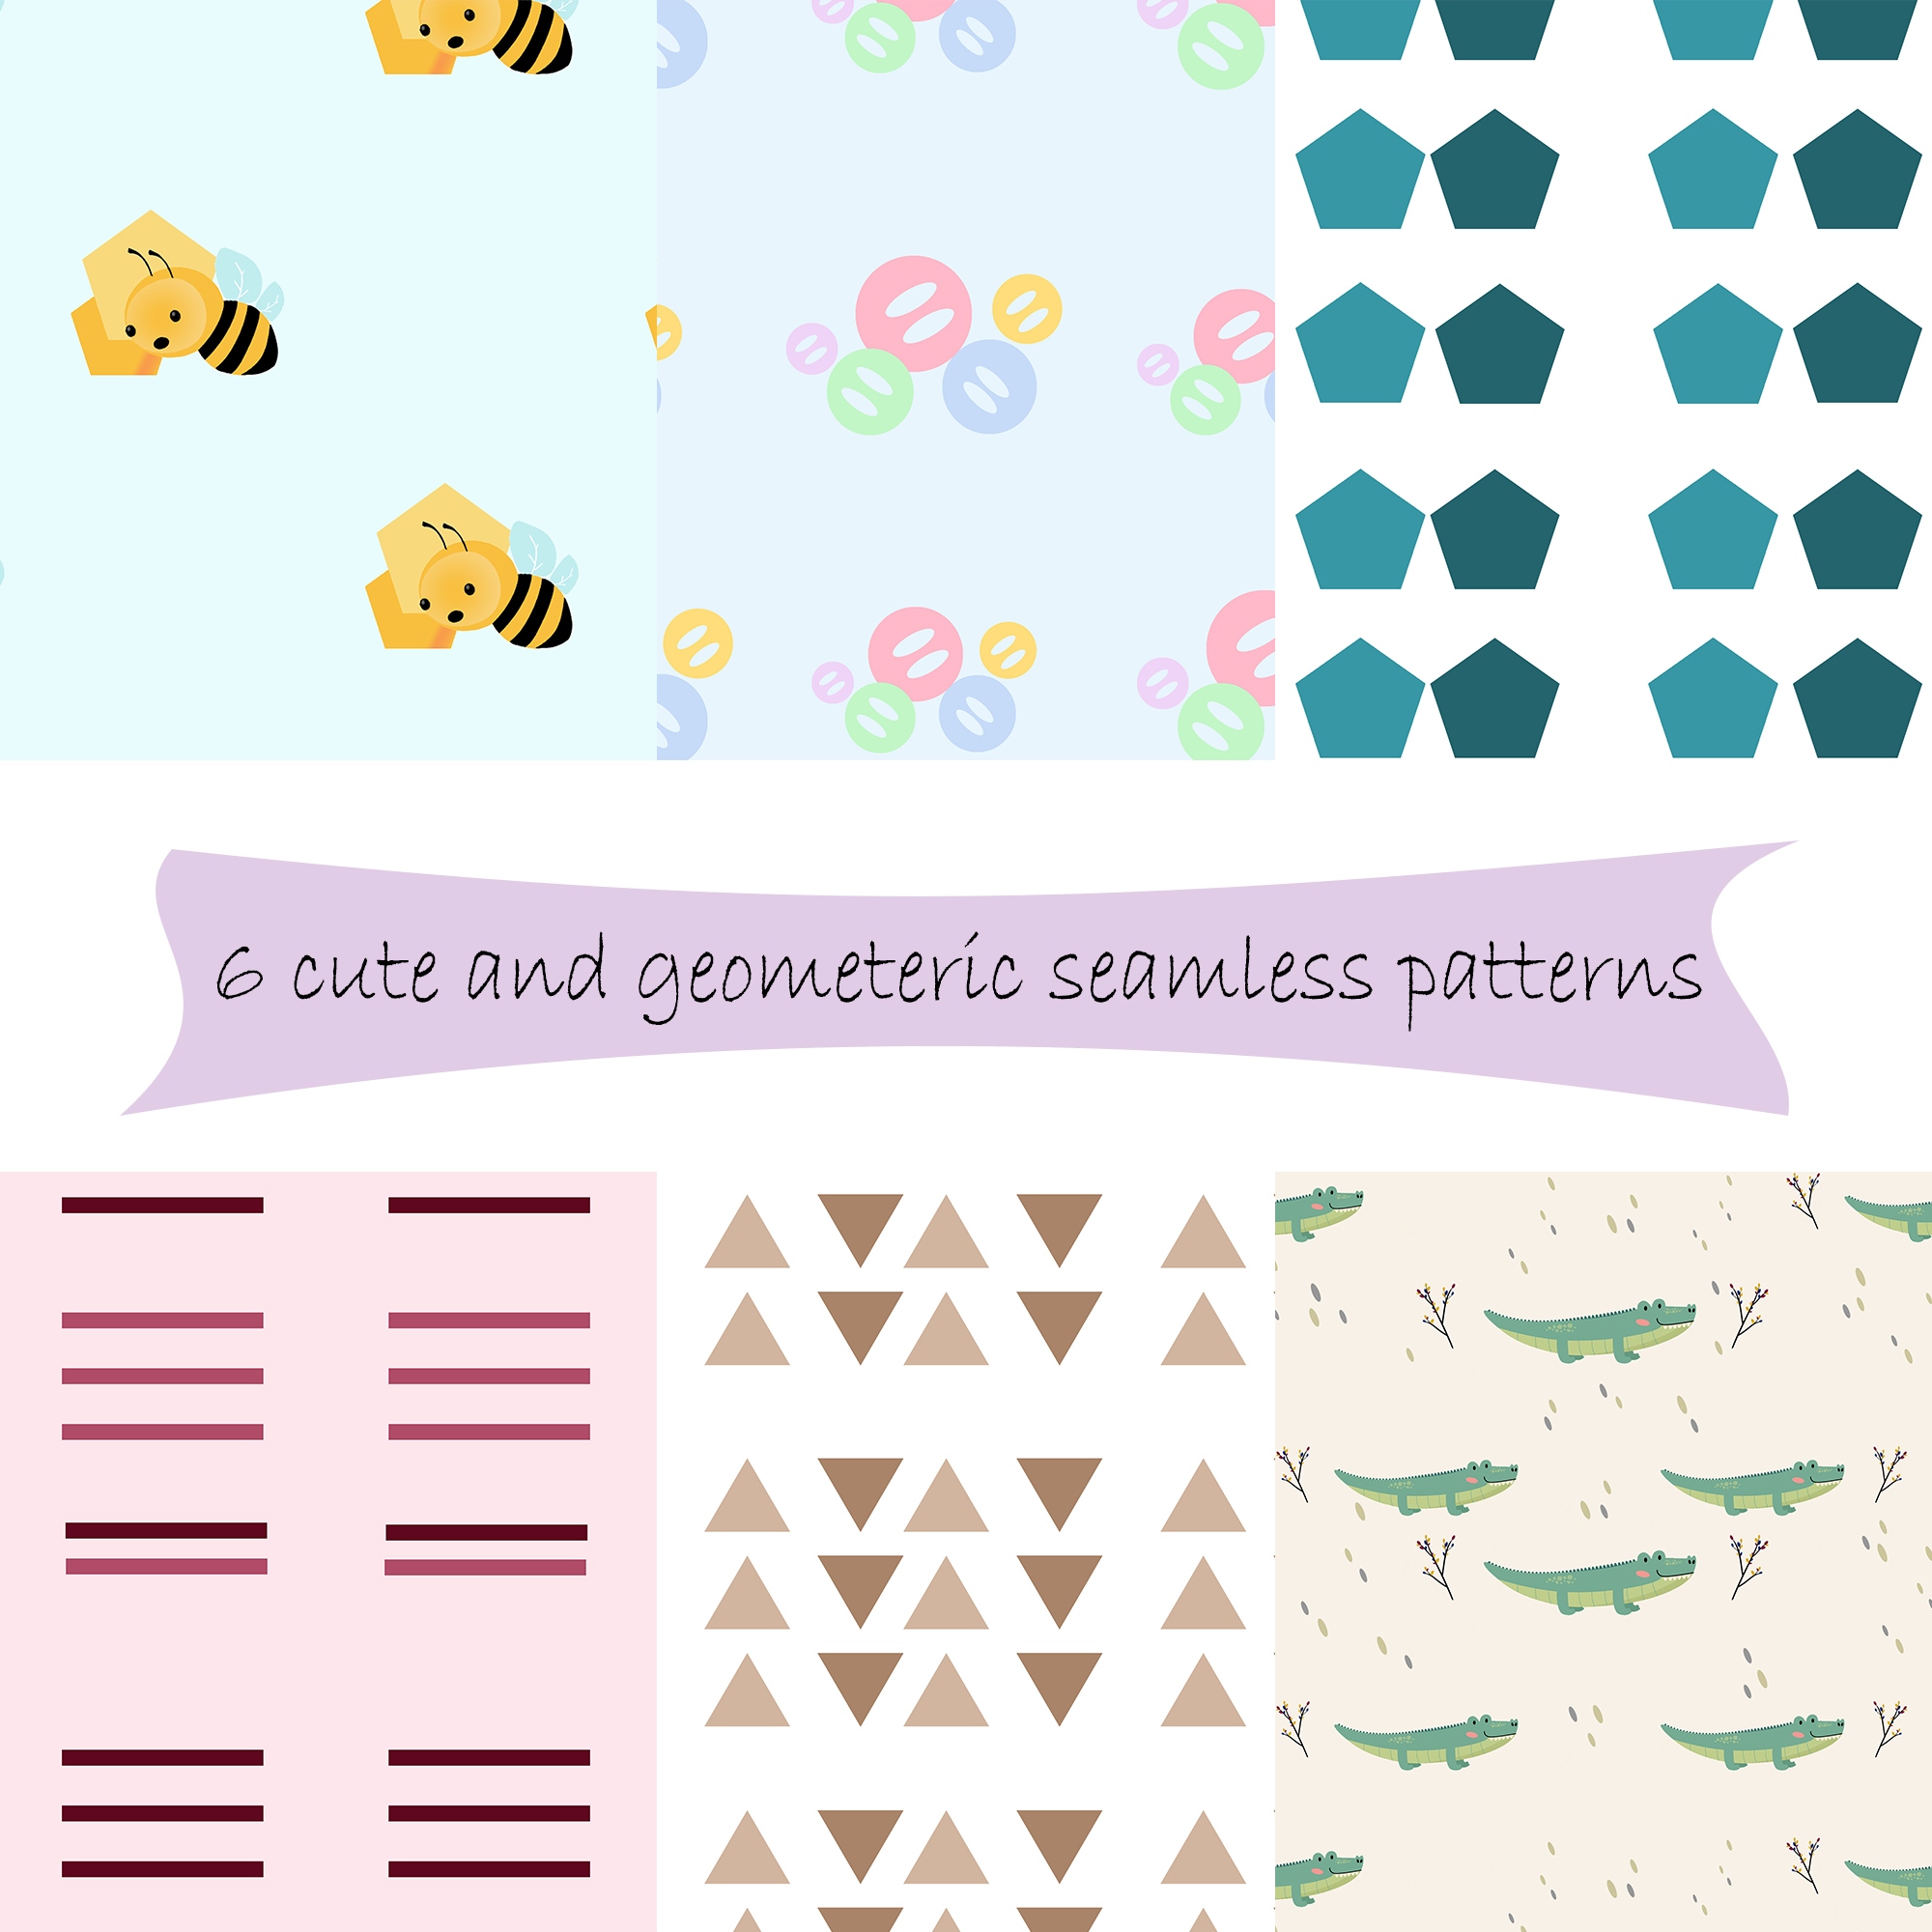 6 cute seamless patterns, budget friendly cover image.